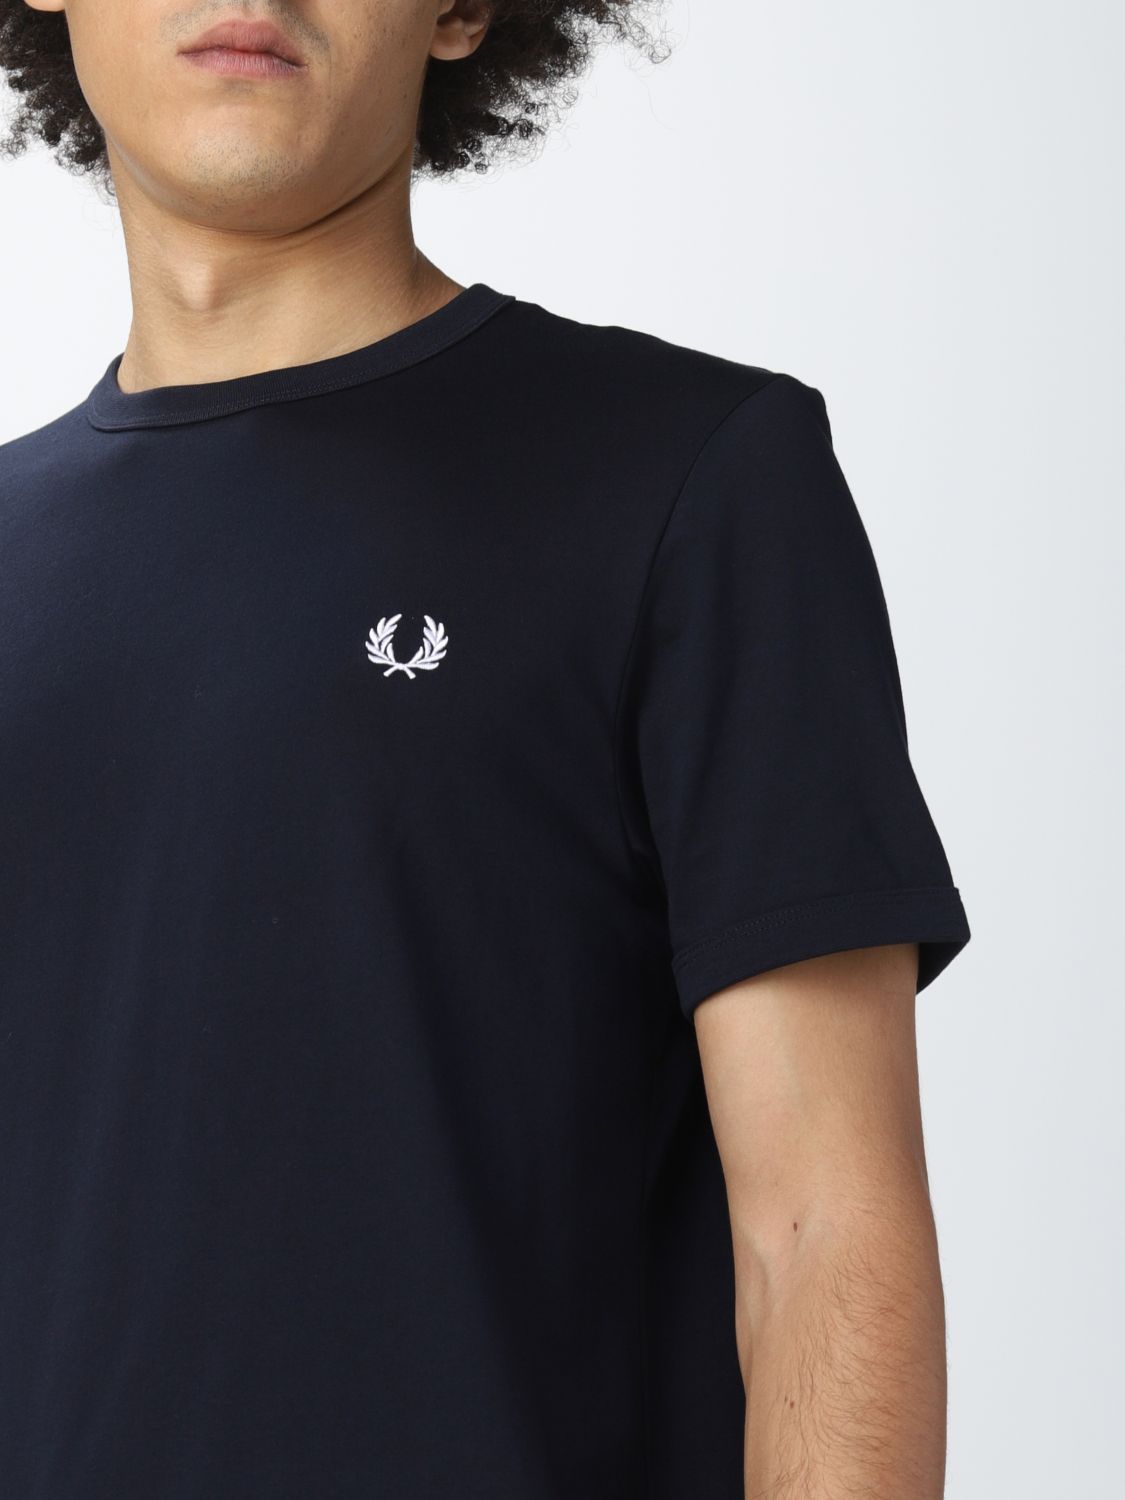 Tシャツ Fred Perry: Tシャツ Fred Perry メンズ ネイビー 3